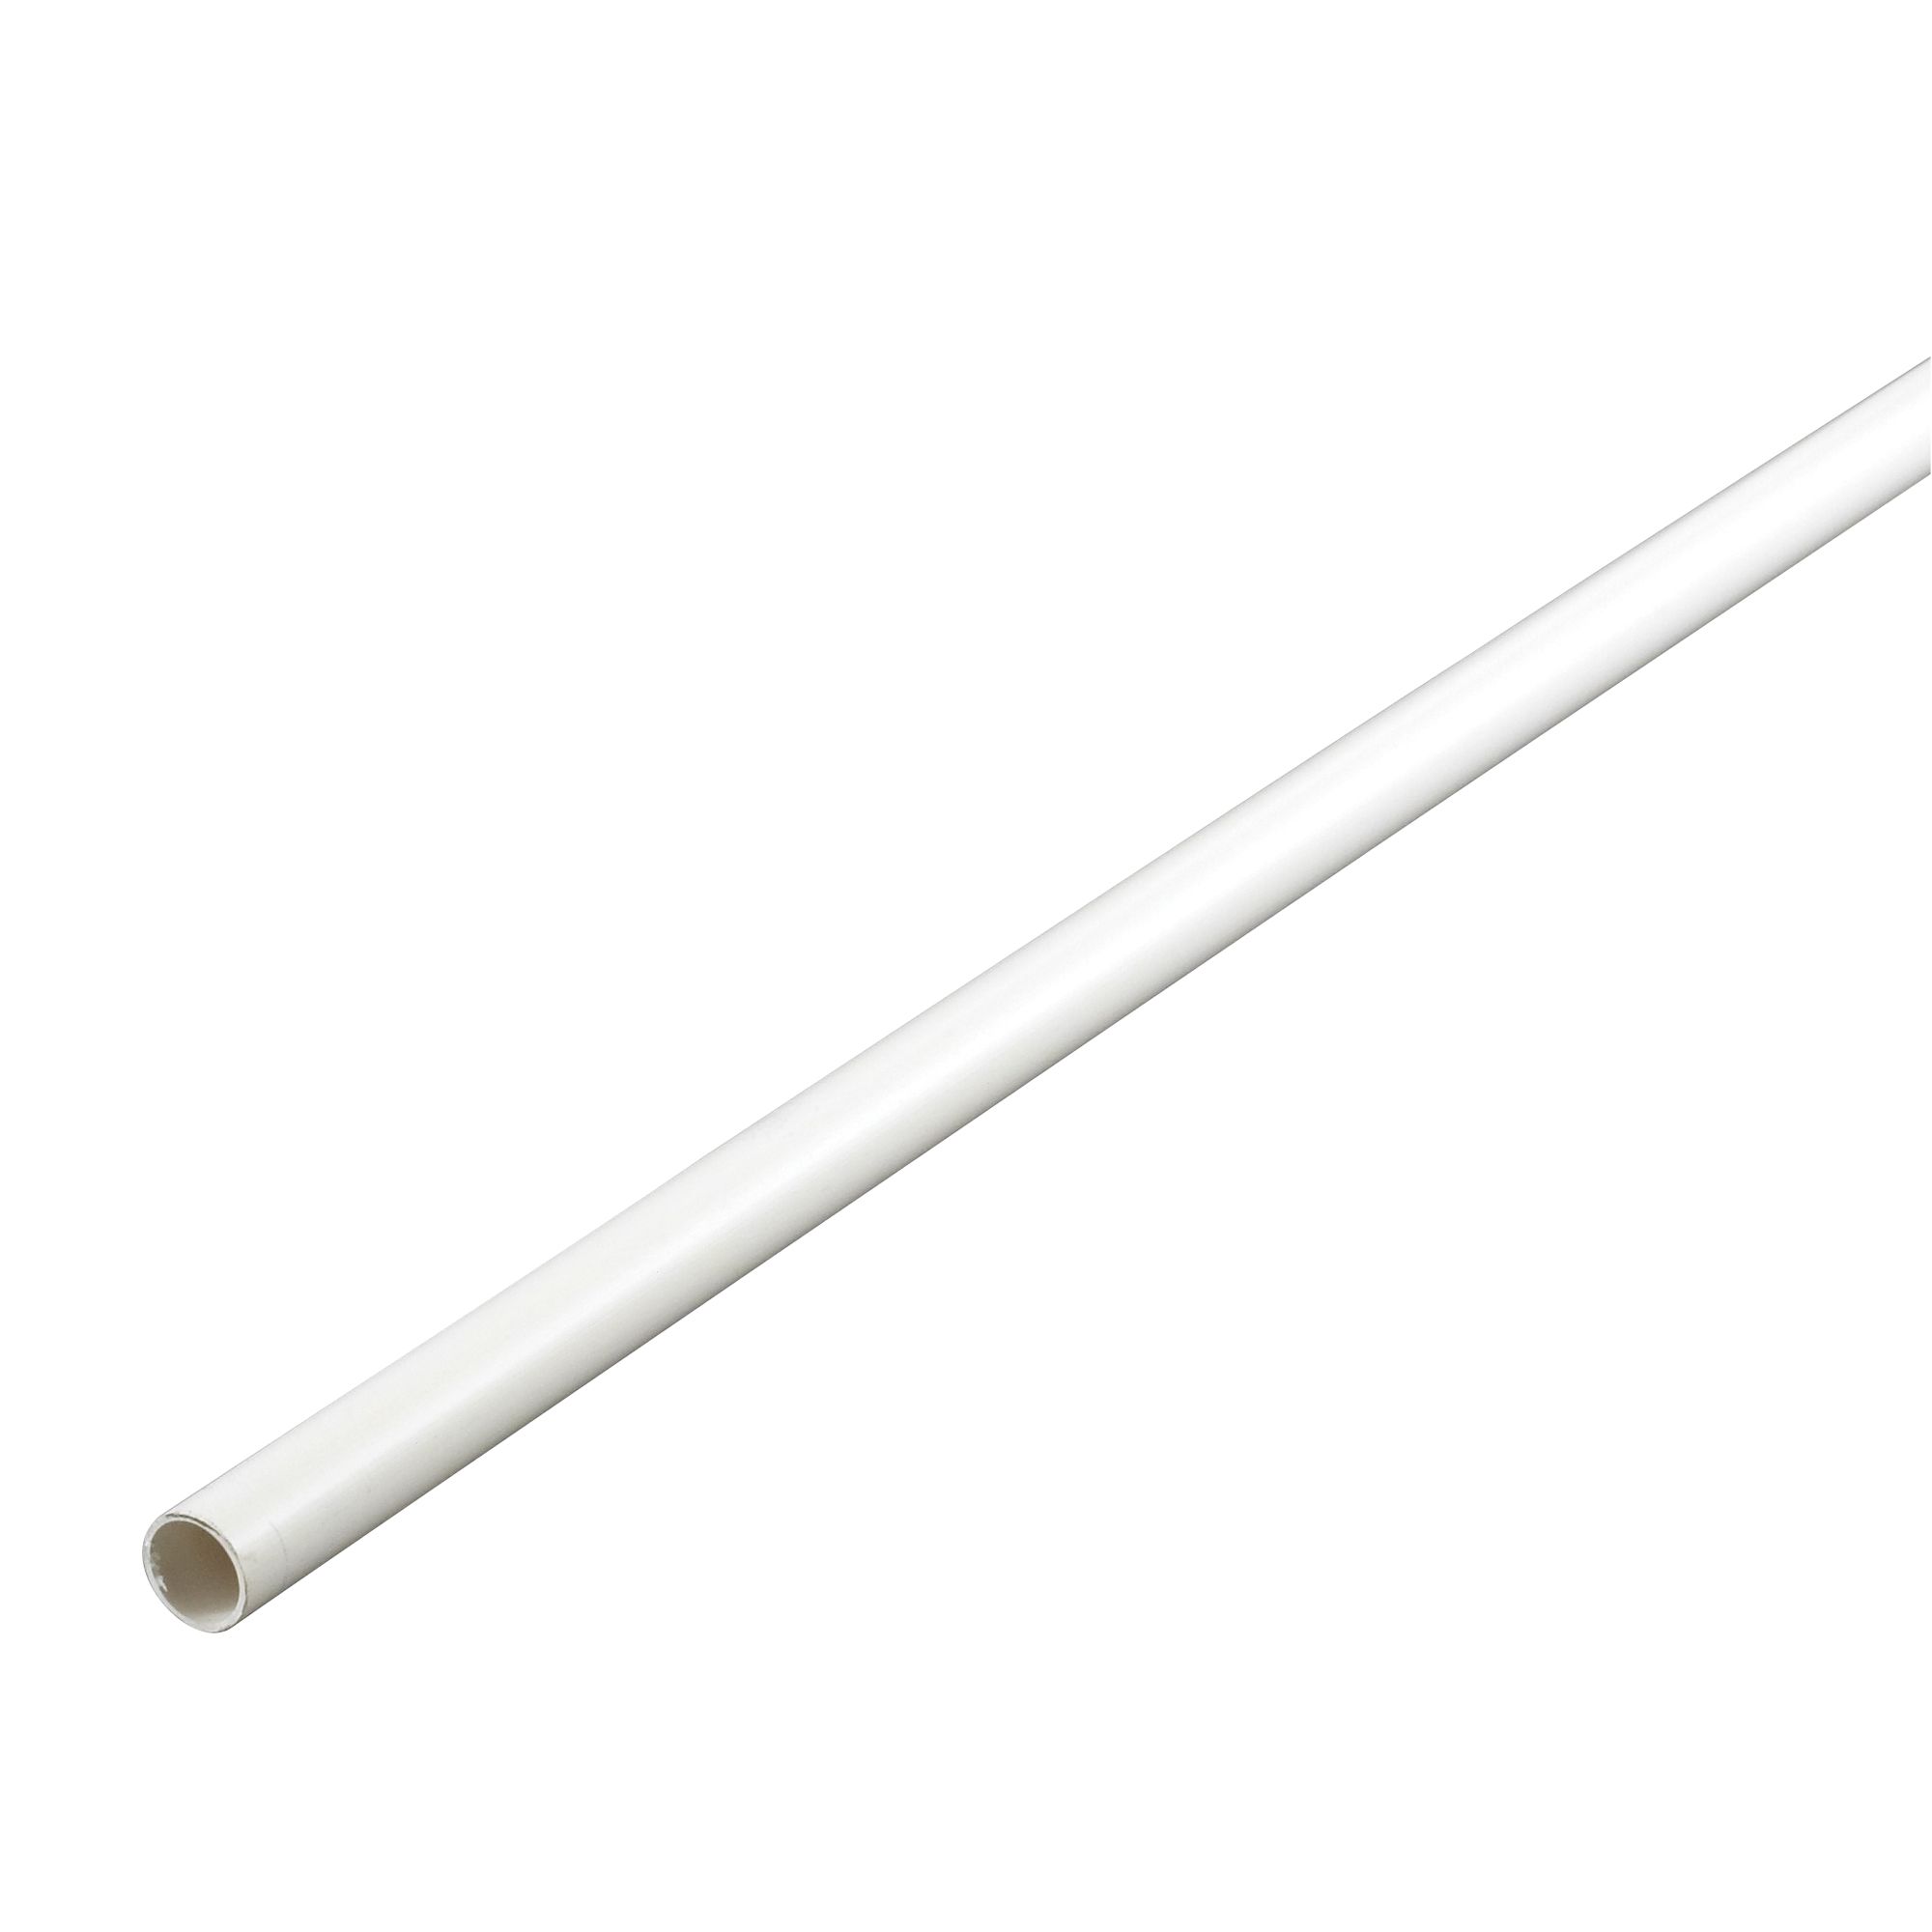 white long pipe with a bend, ribbed, strange shape. plastic pipe